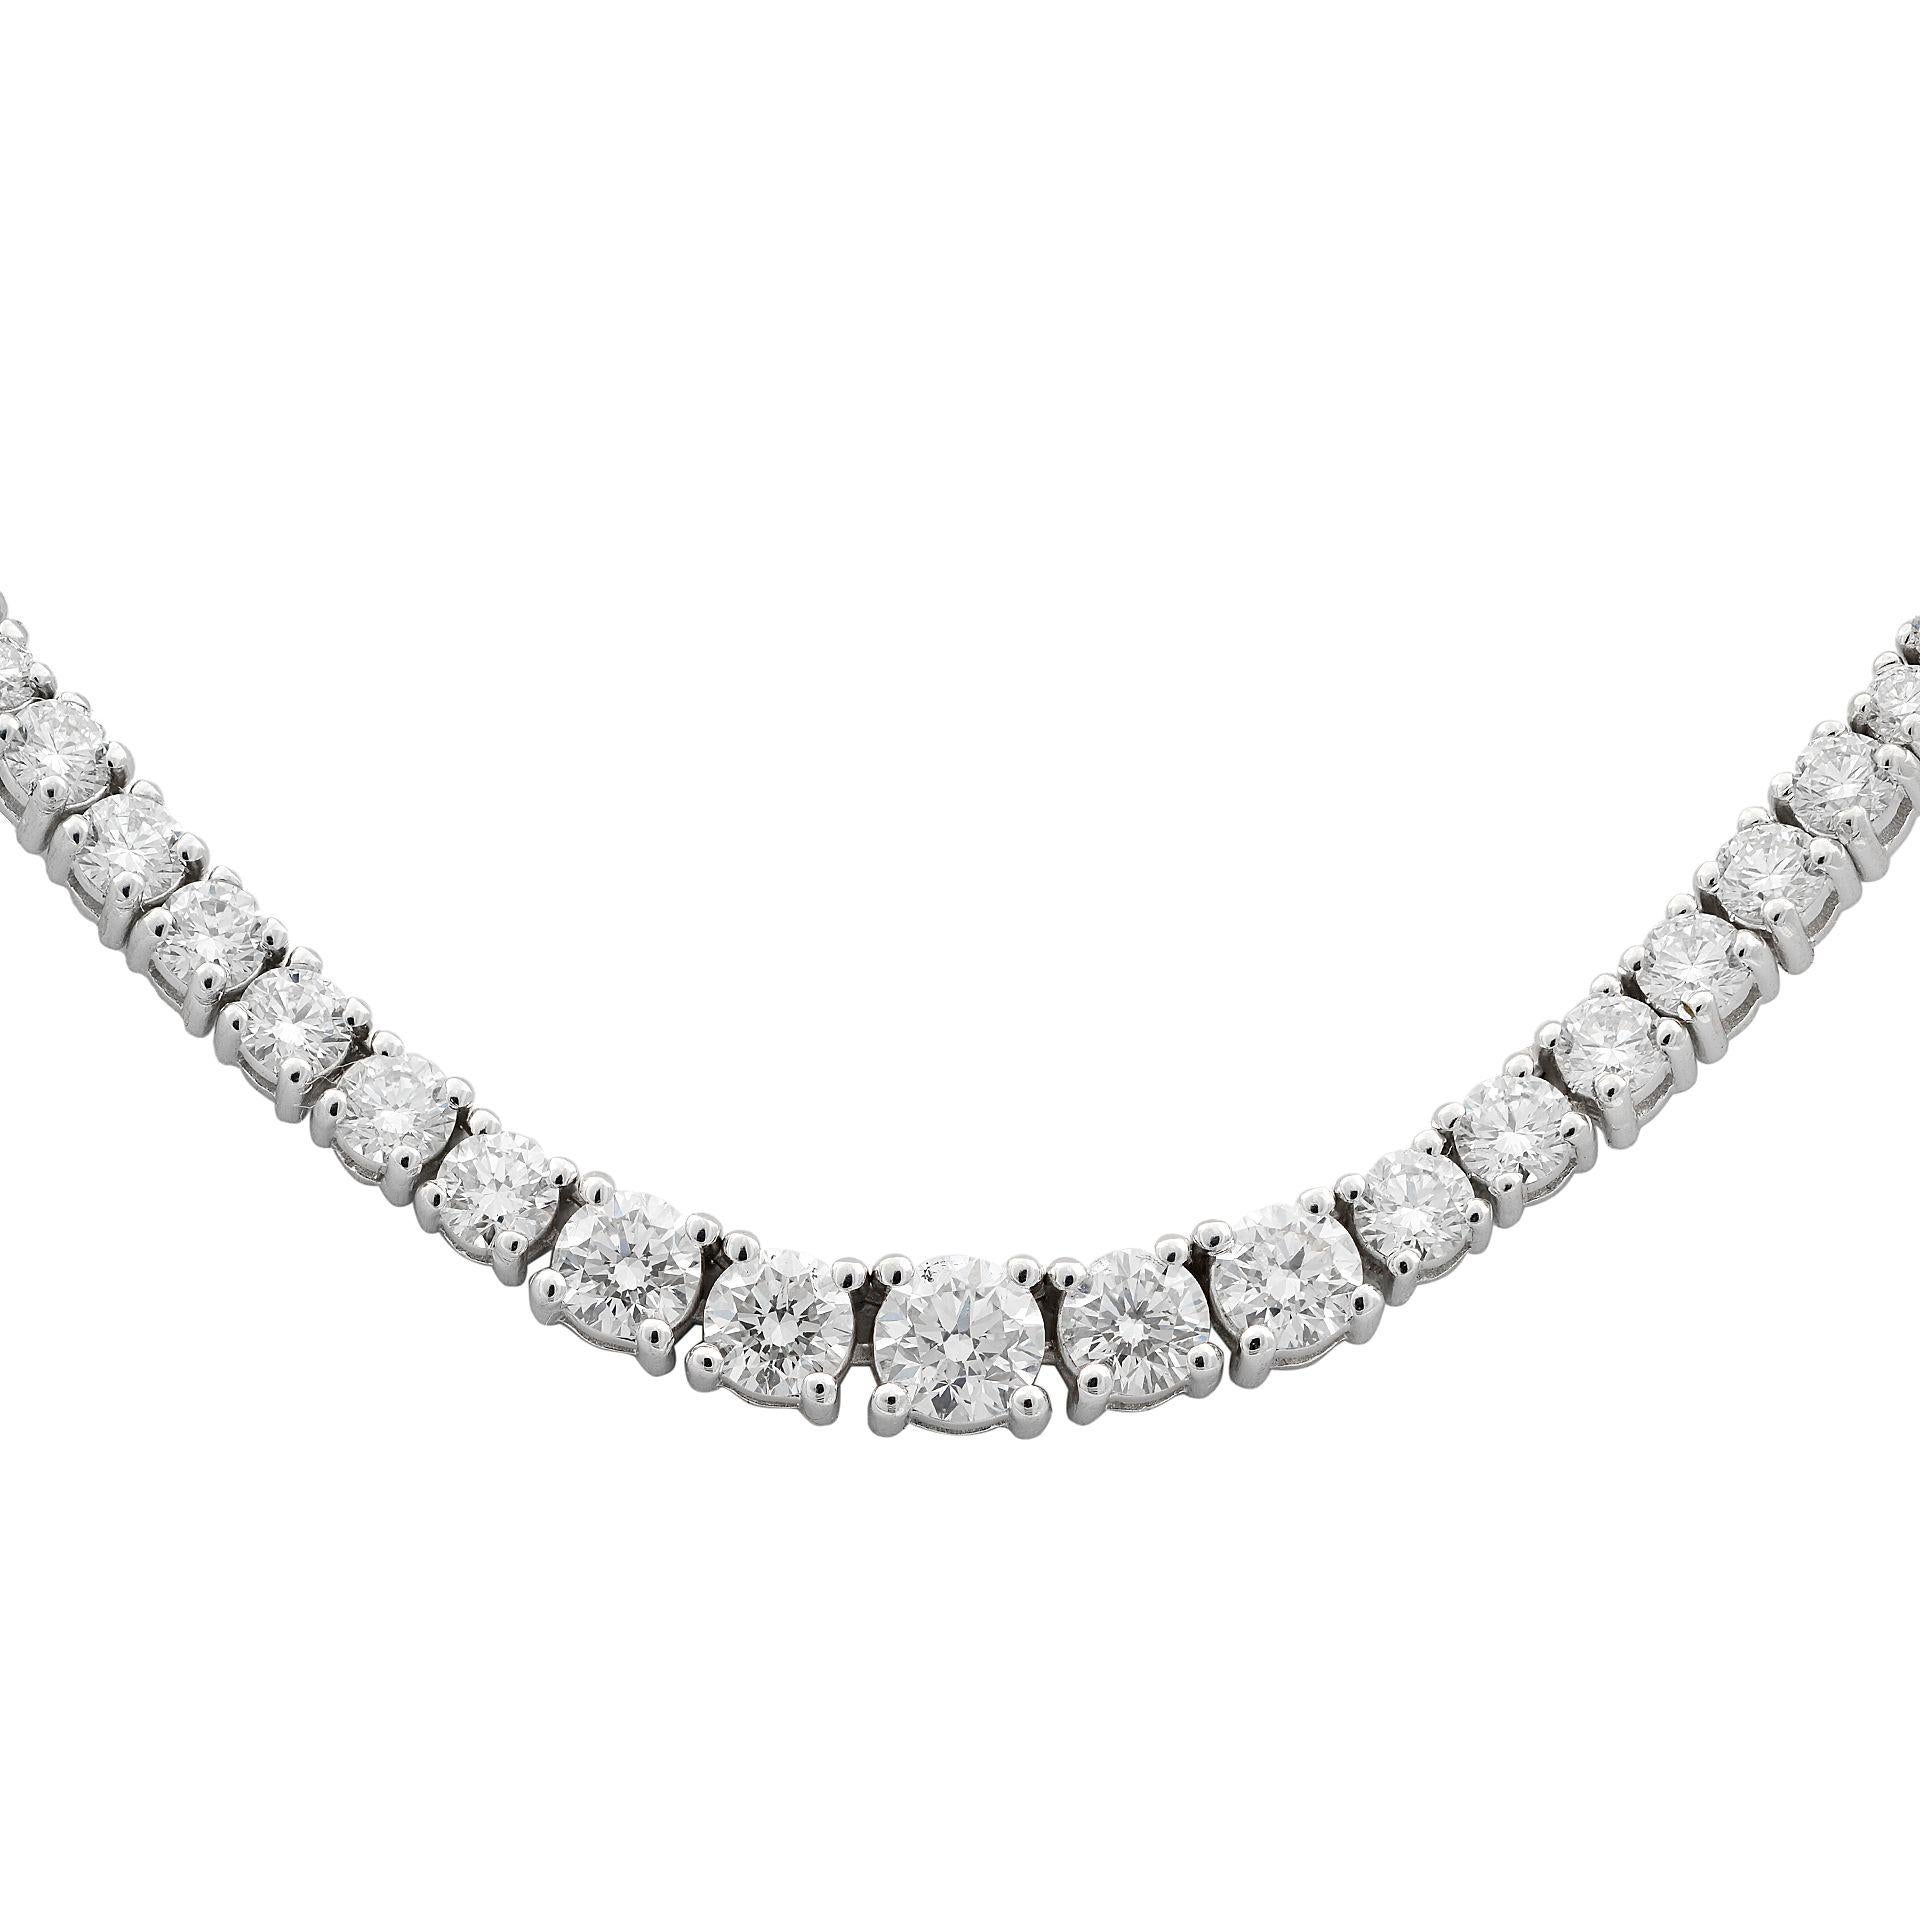 The necklace boasts 187 round-cut brilliant diamonds set in 14k white gold.  With a dazzling 7.58 carats total weight. The necklace closes securely with a box clasp. Length: 18 inches. Width: 4.60-2.50 mm.  This is a piece that demands attention and